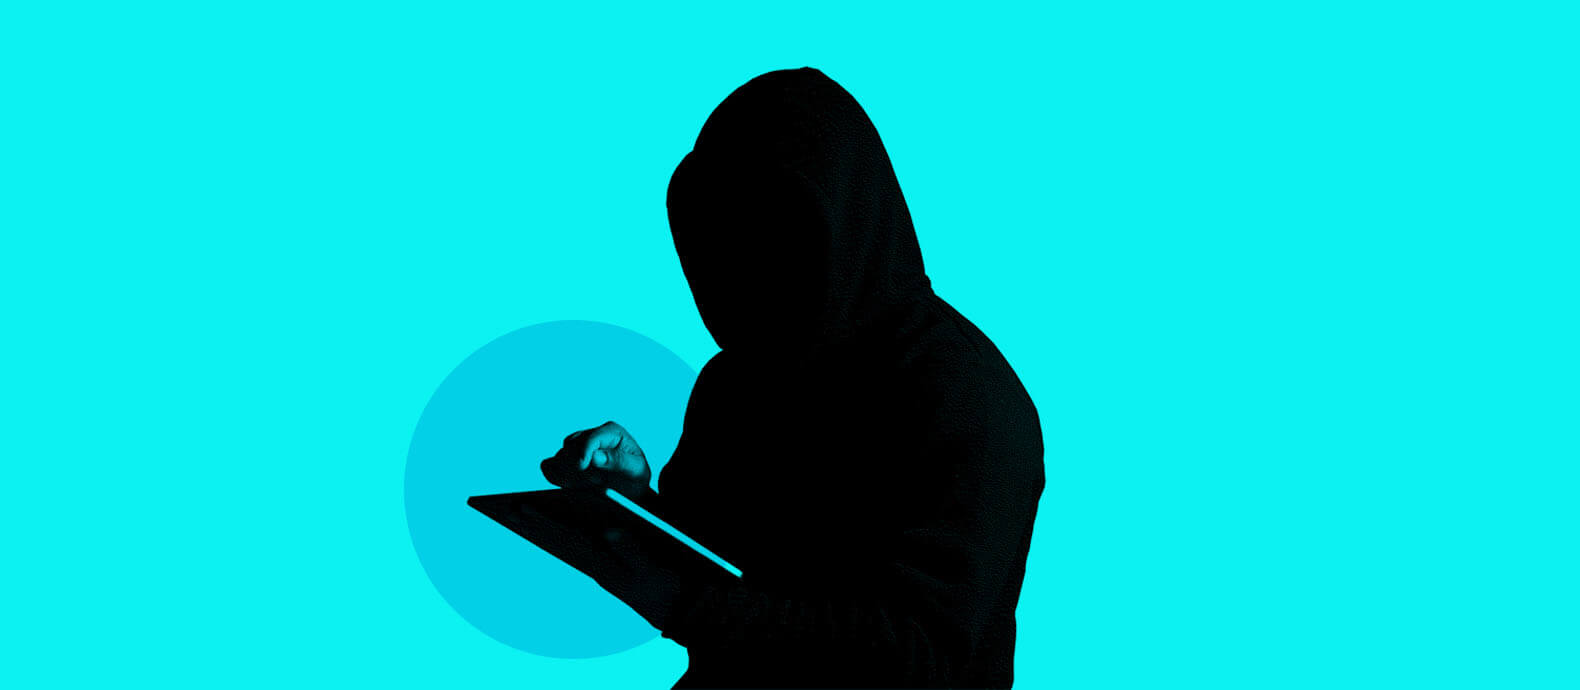 What to do when your business falls victim to cybercrime